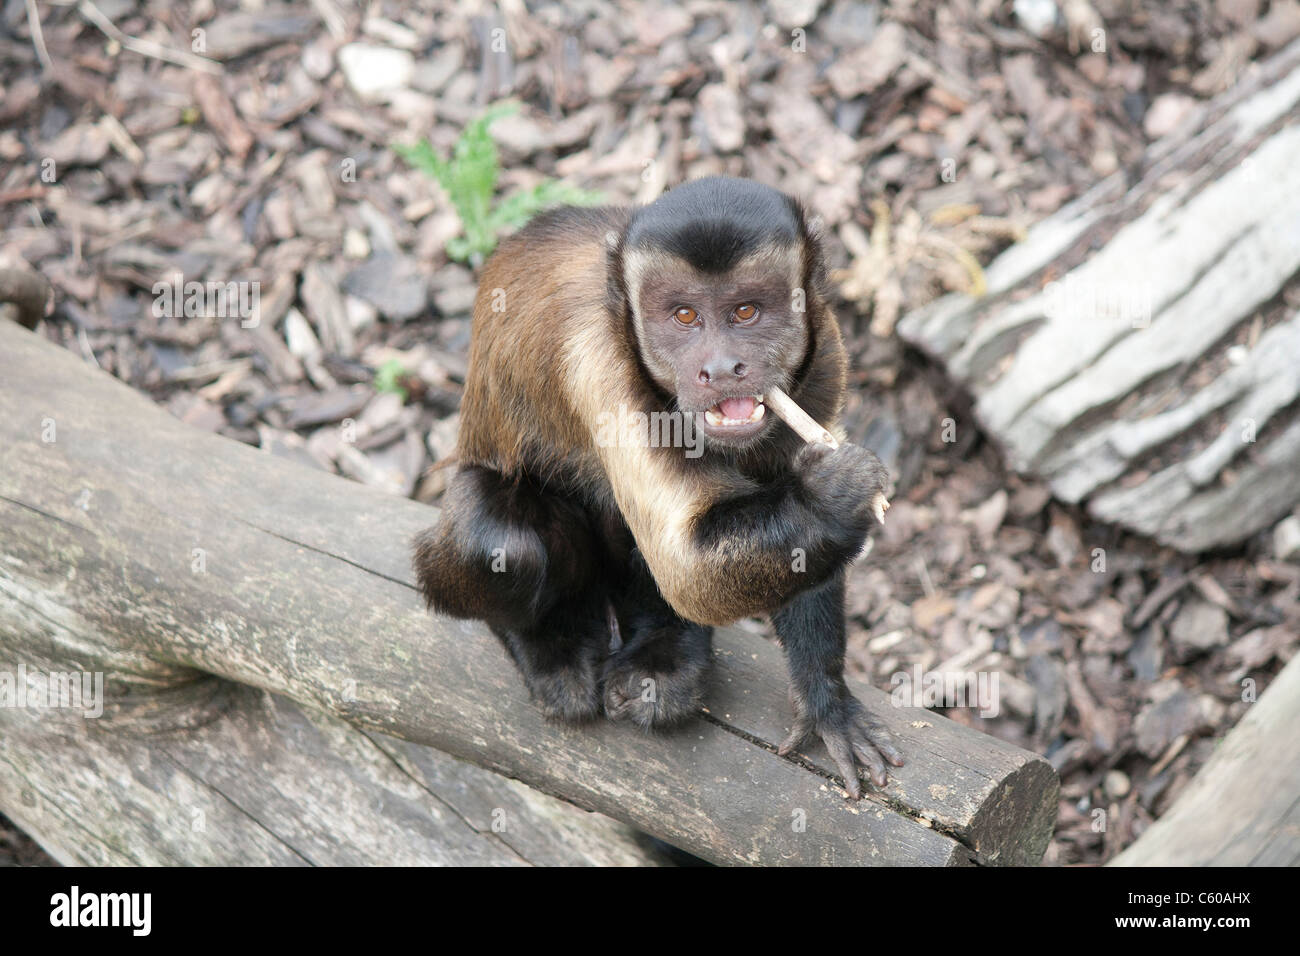 Tufted capuchin (brown capuchin/black-capped capuchin/Cebus apella) monkey playing with a stick while sitting on a log. Stock Photo